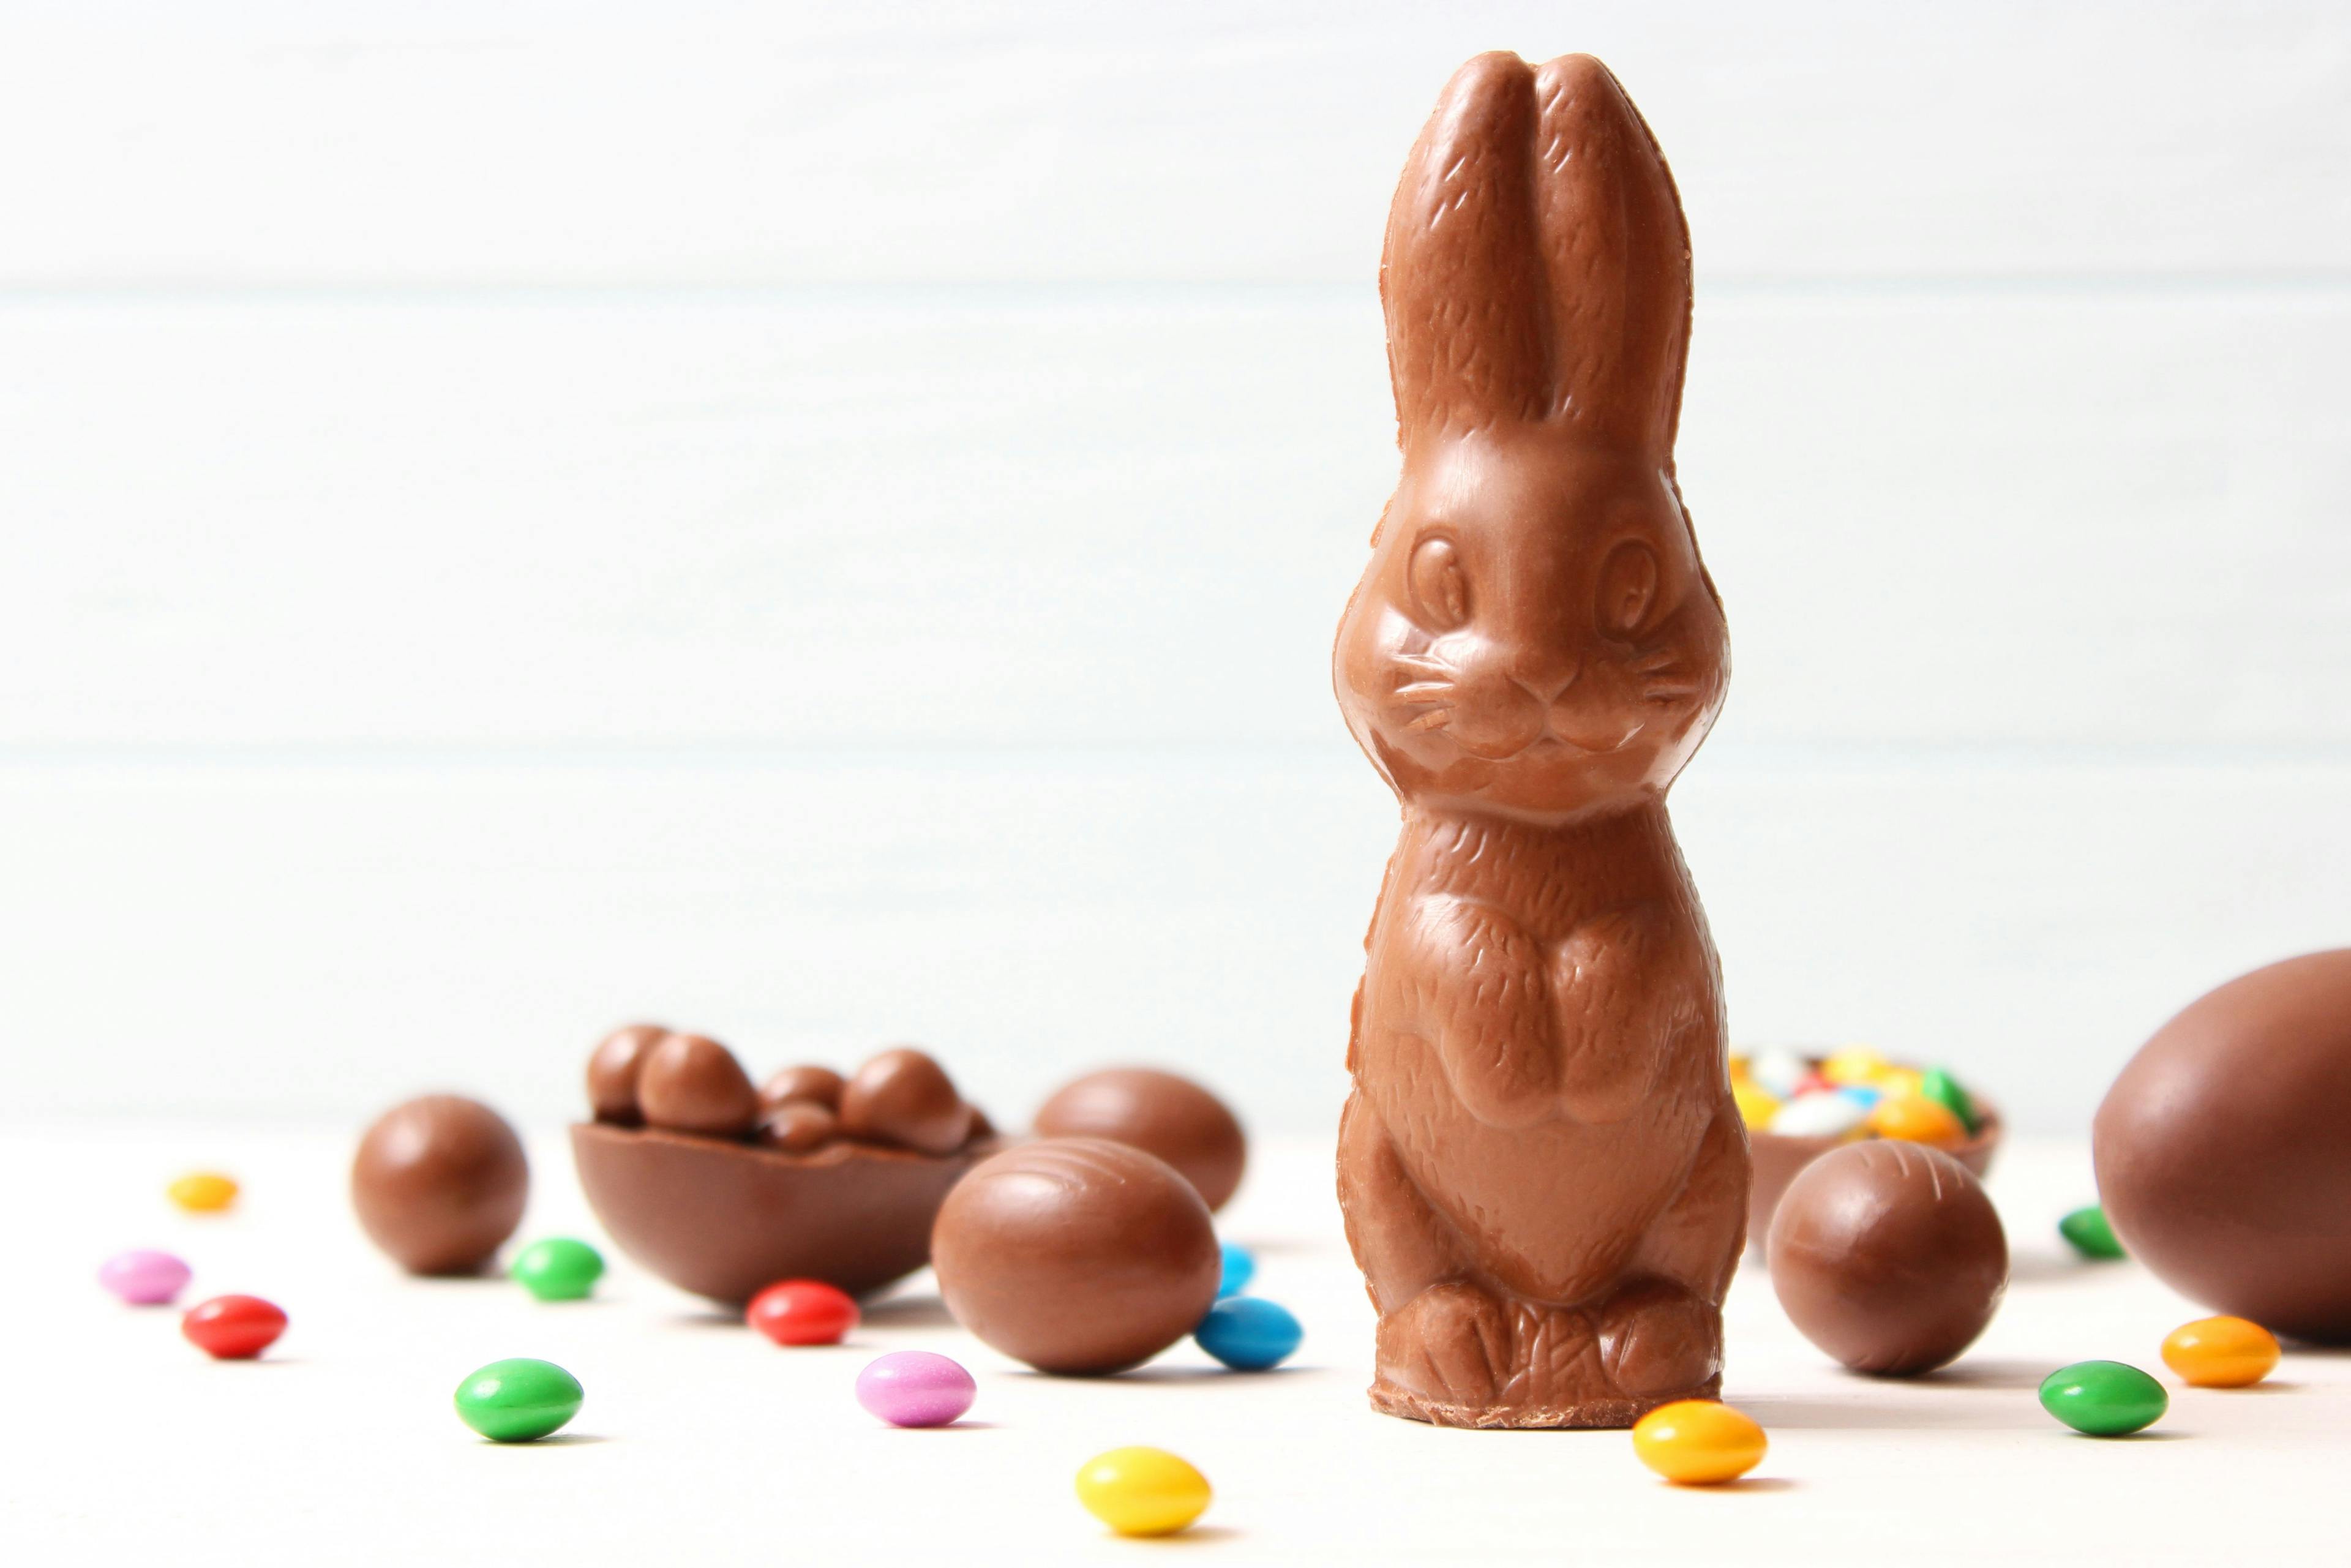 5 Tips to Help Your Patients Deal With Easter Candy Sugar Crash